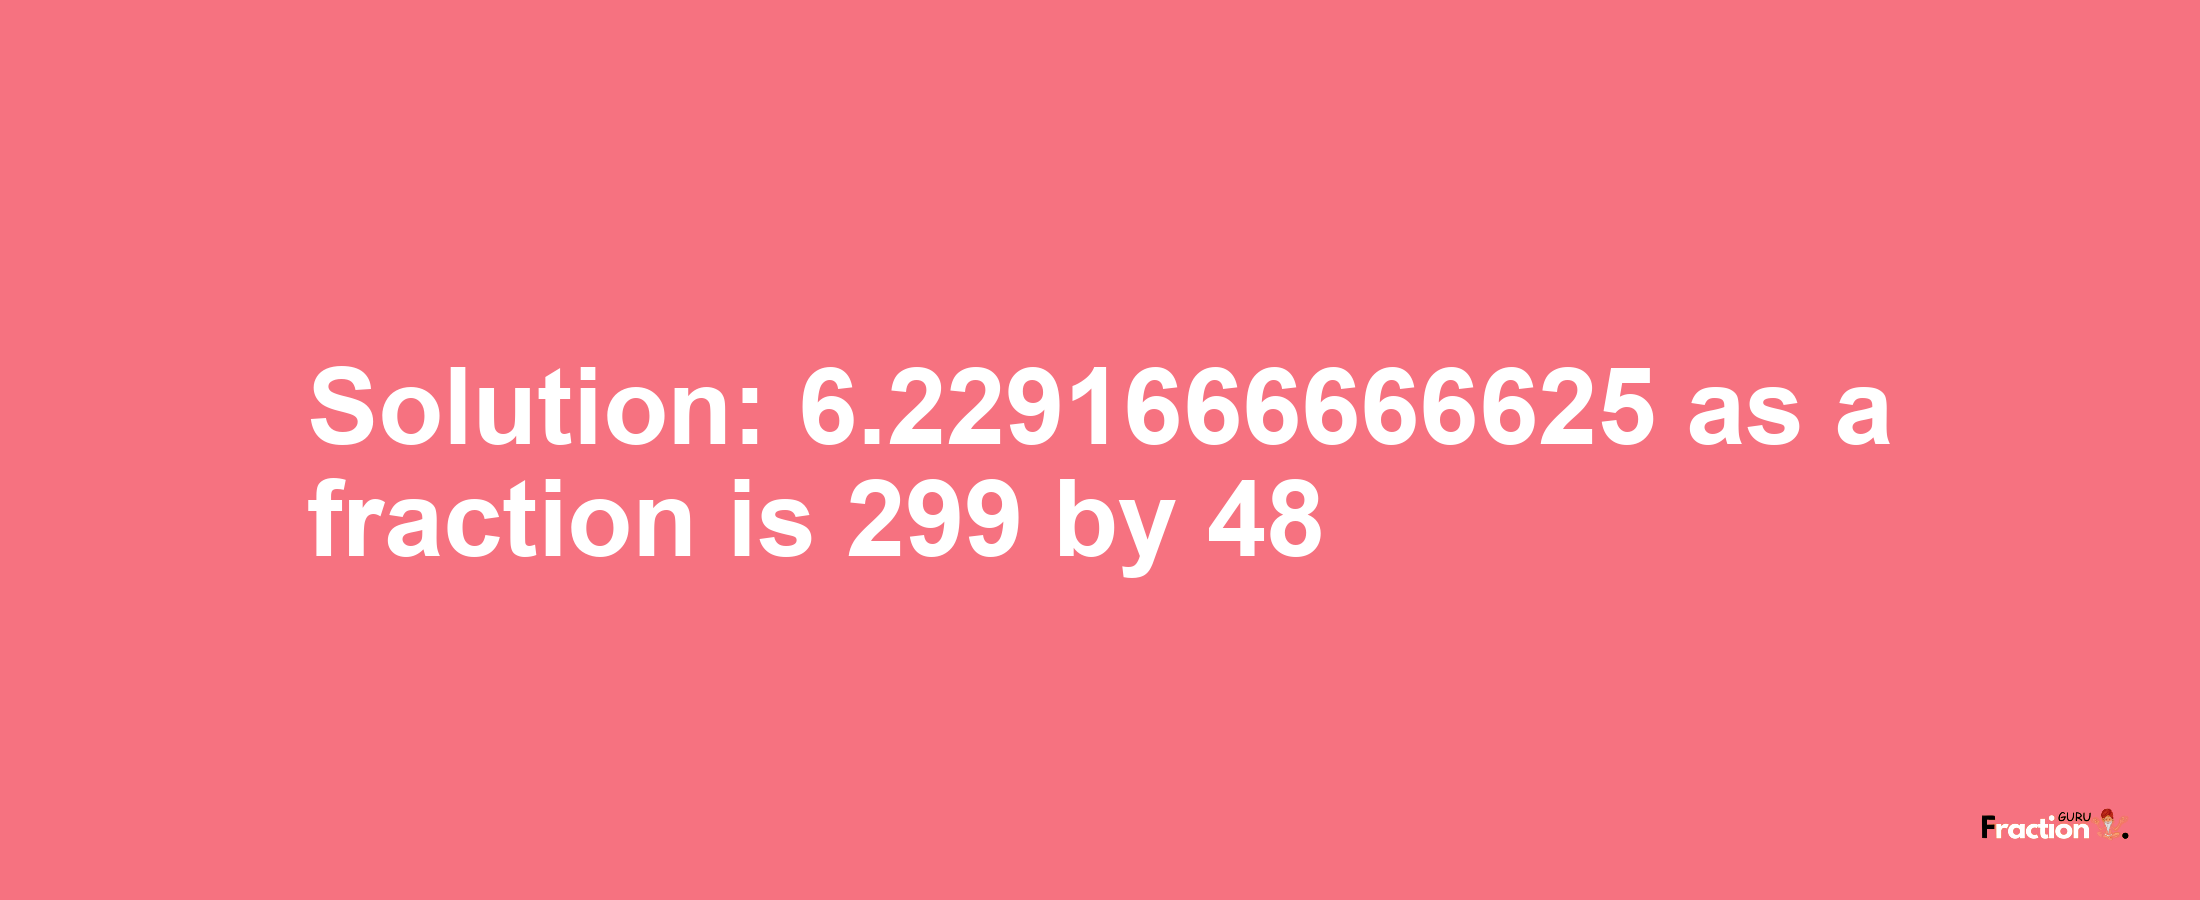 Solution:6.2291666666625 as a fraction is 299/48